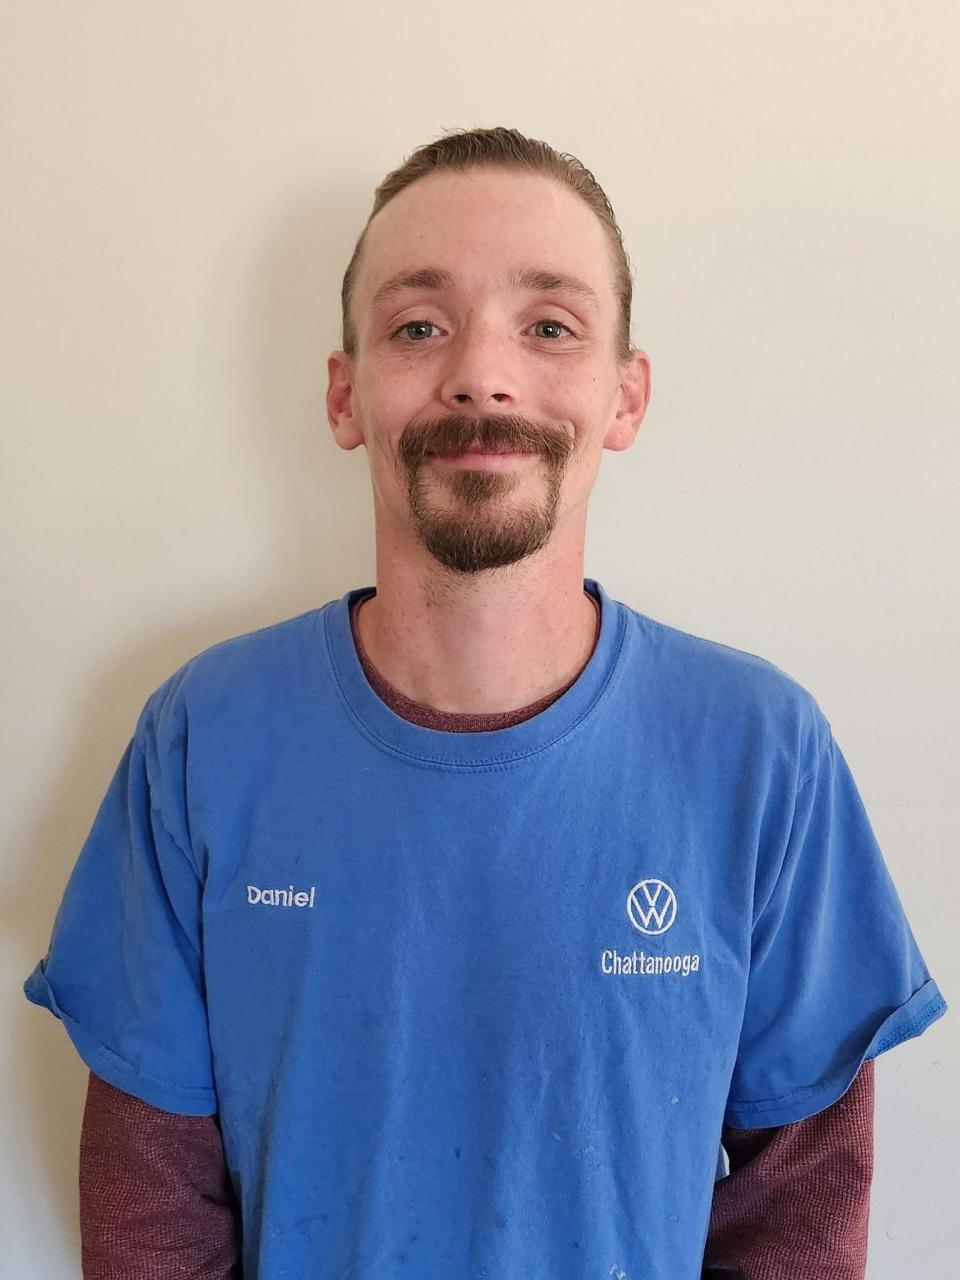 Daniel Kaczmarek, 35, a Volkswagen employee in Chattanooga, Tennessee who works in the paint shop. Kaczmarek said the UAW's contract gains with the Detroit automakers inspired him and others to be seeking union representation at VW.